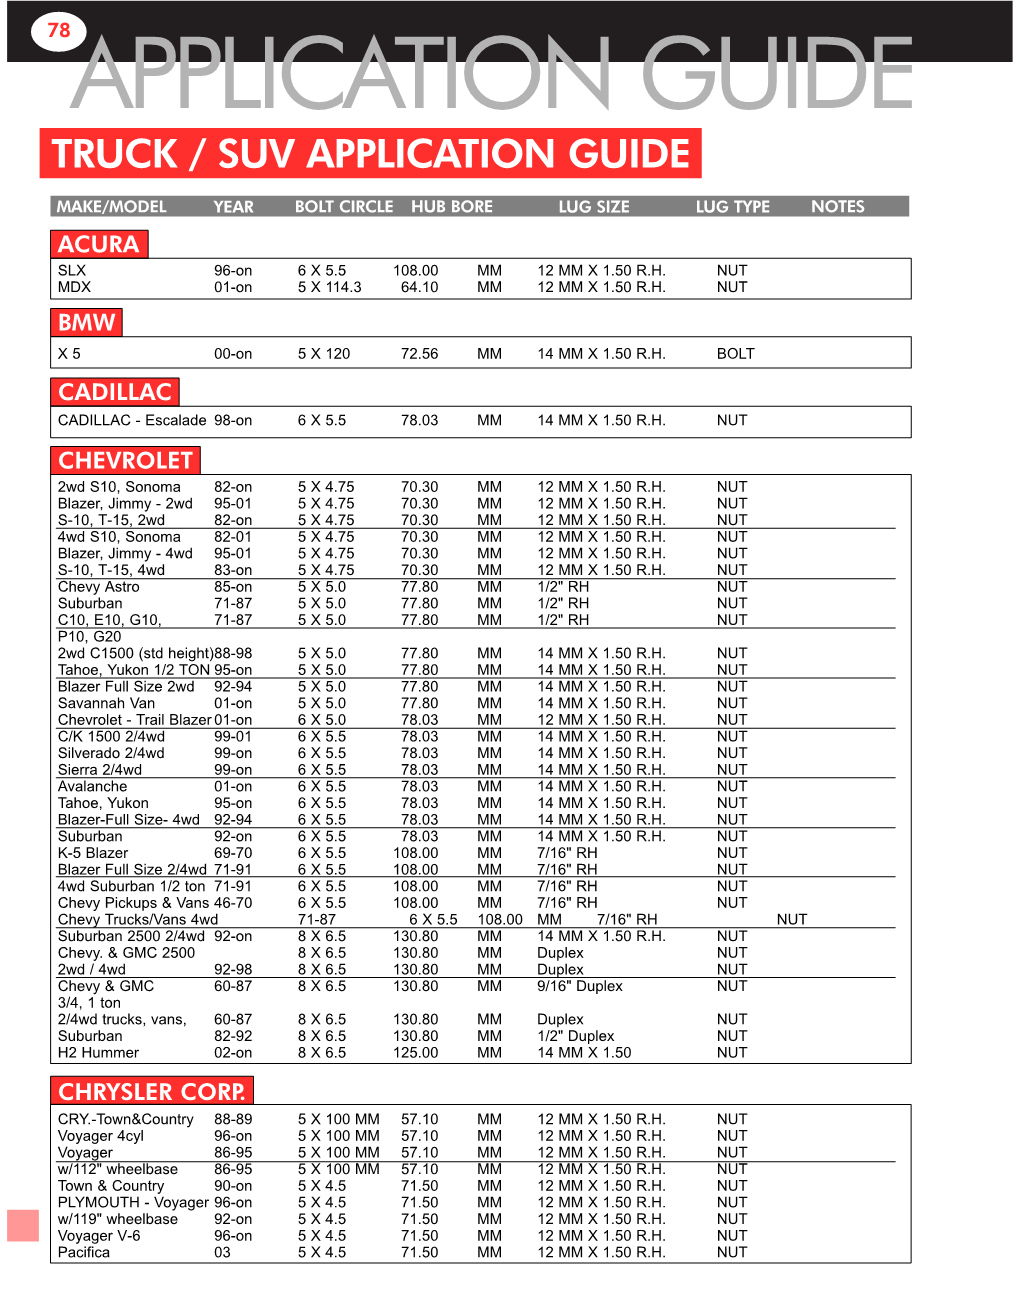 78Application Guide